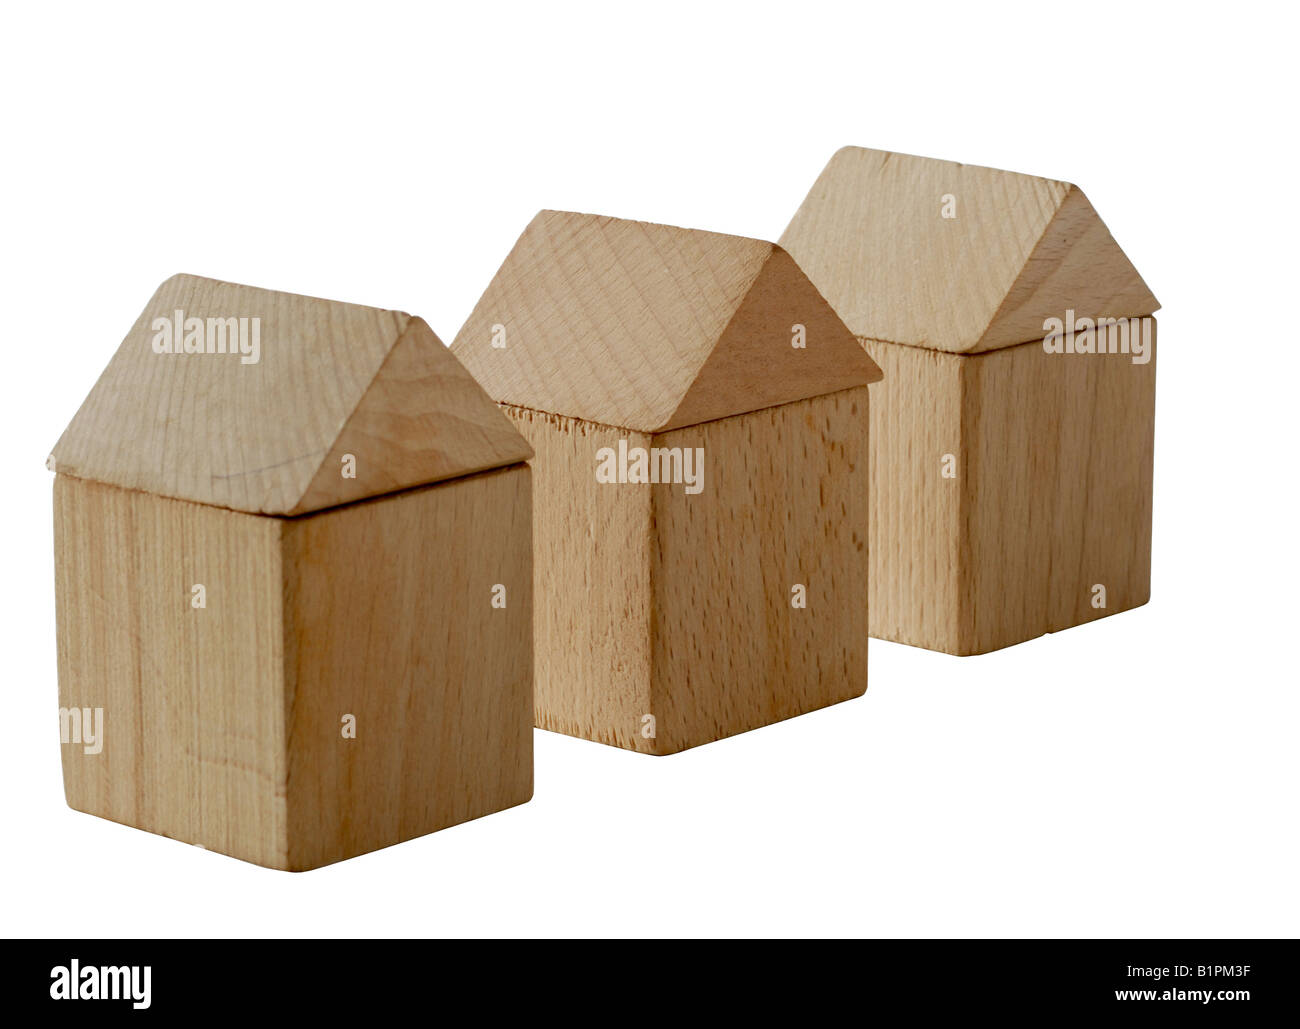 The house Toy habitation from wooden blocks Stock Photo